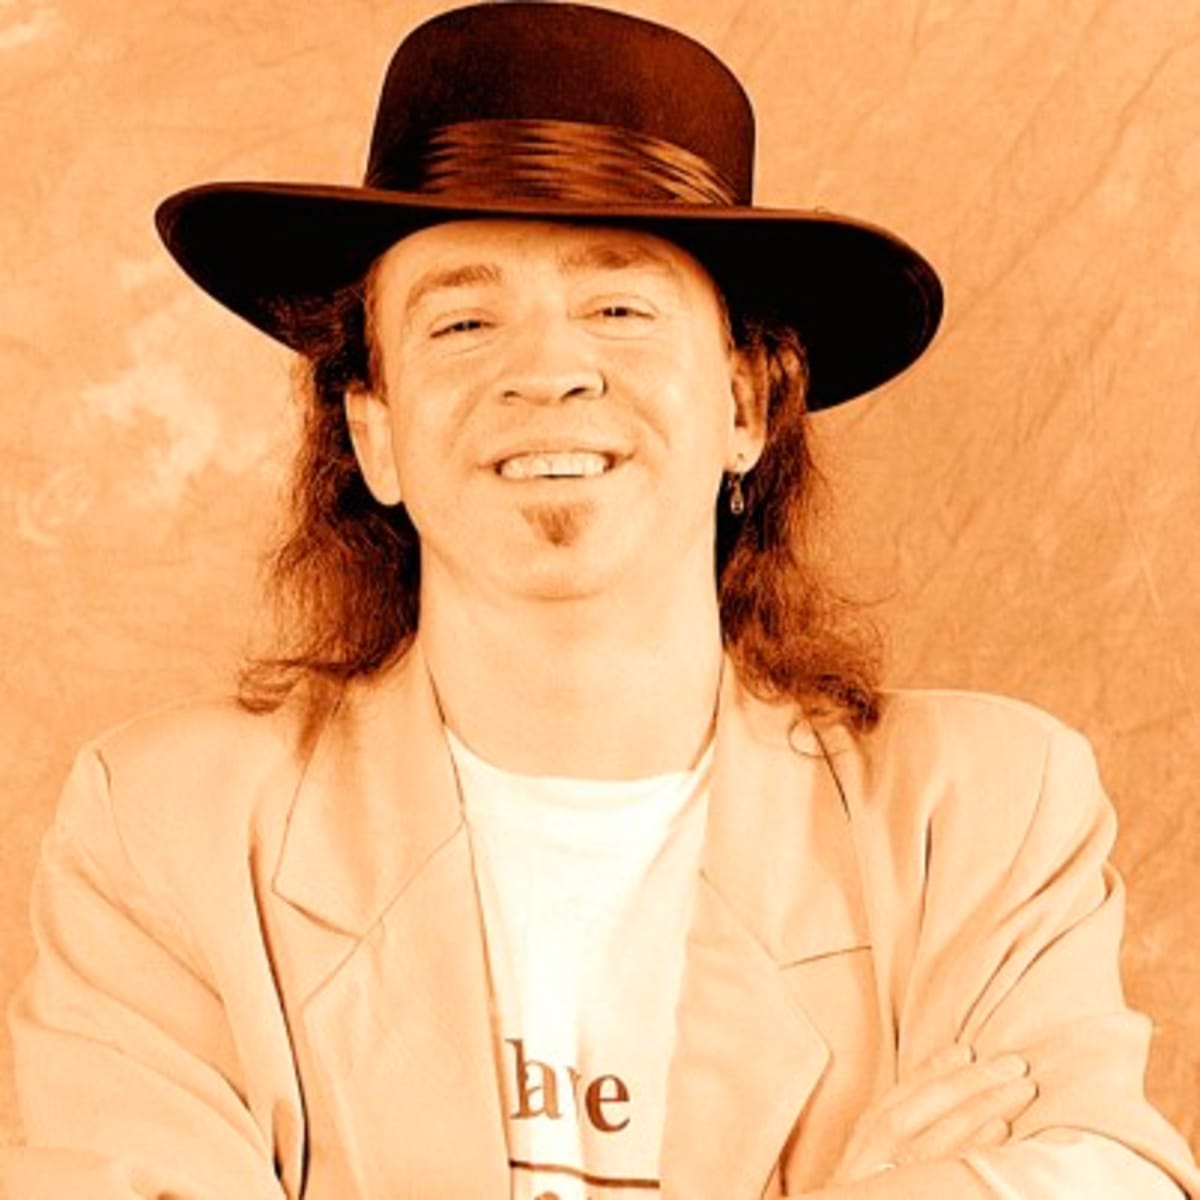 Born #OnThisDay 3rd Oct 1954 #StevieRayVaughan He was one of the most influential guitarists in the revival of the blues in the 1980's. Stevie was killed in a helicopter crash on 27th August 1990 aged just 35. https://t.co/HoSRL2ap5D
https://t.co/O55VSCR1lJ Voodoo Child https://t.co/L4mOc19Yfz